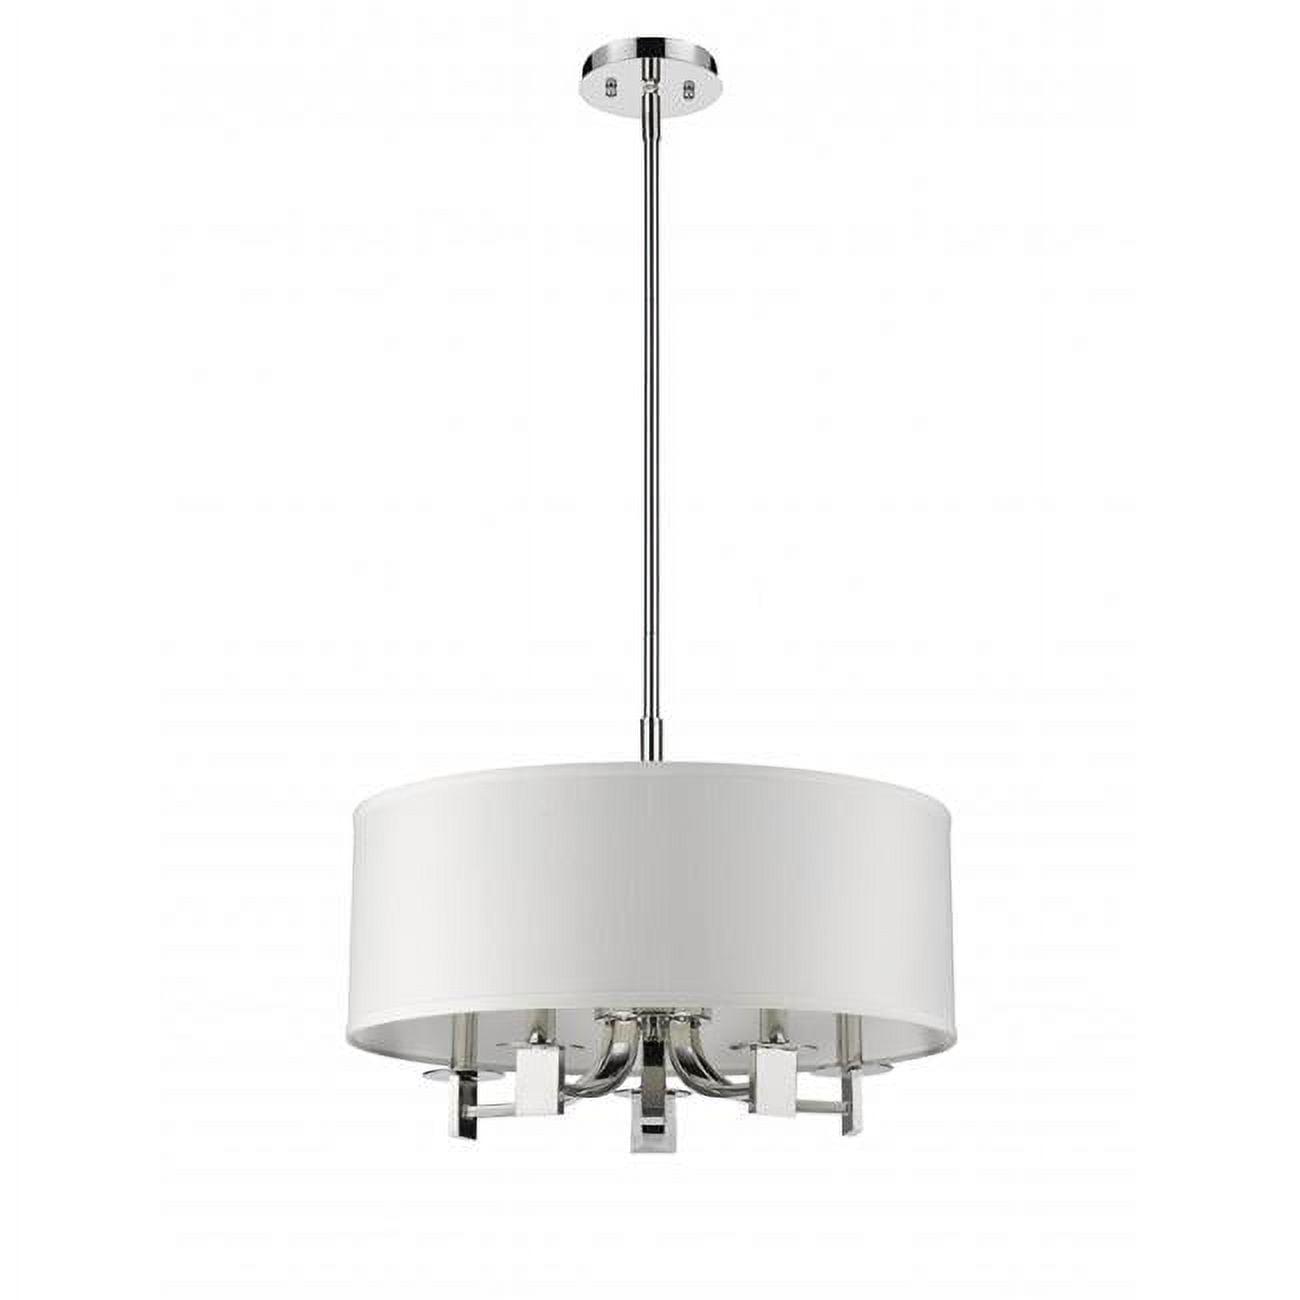 Elegant Andrea Polished Nickel Drum Pendant with Ivory Linen Shade